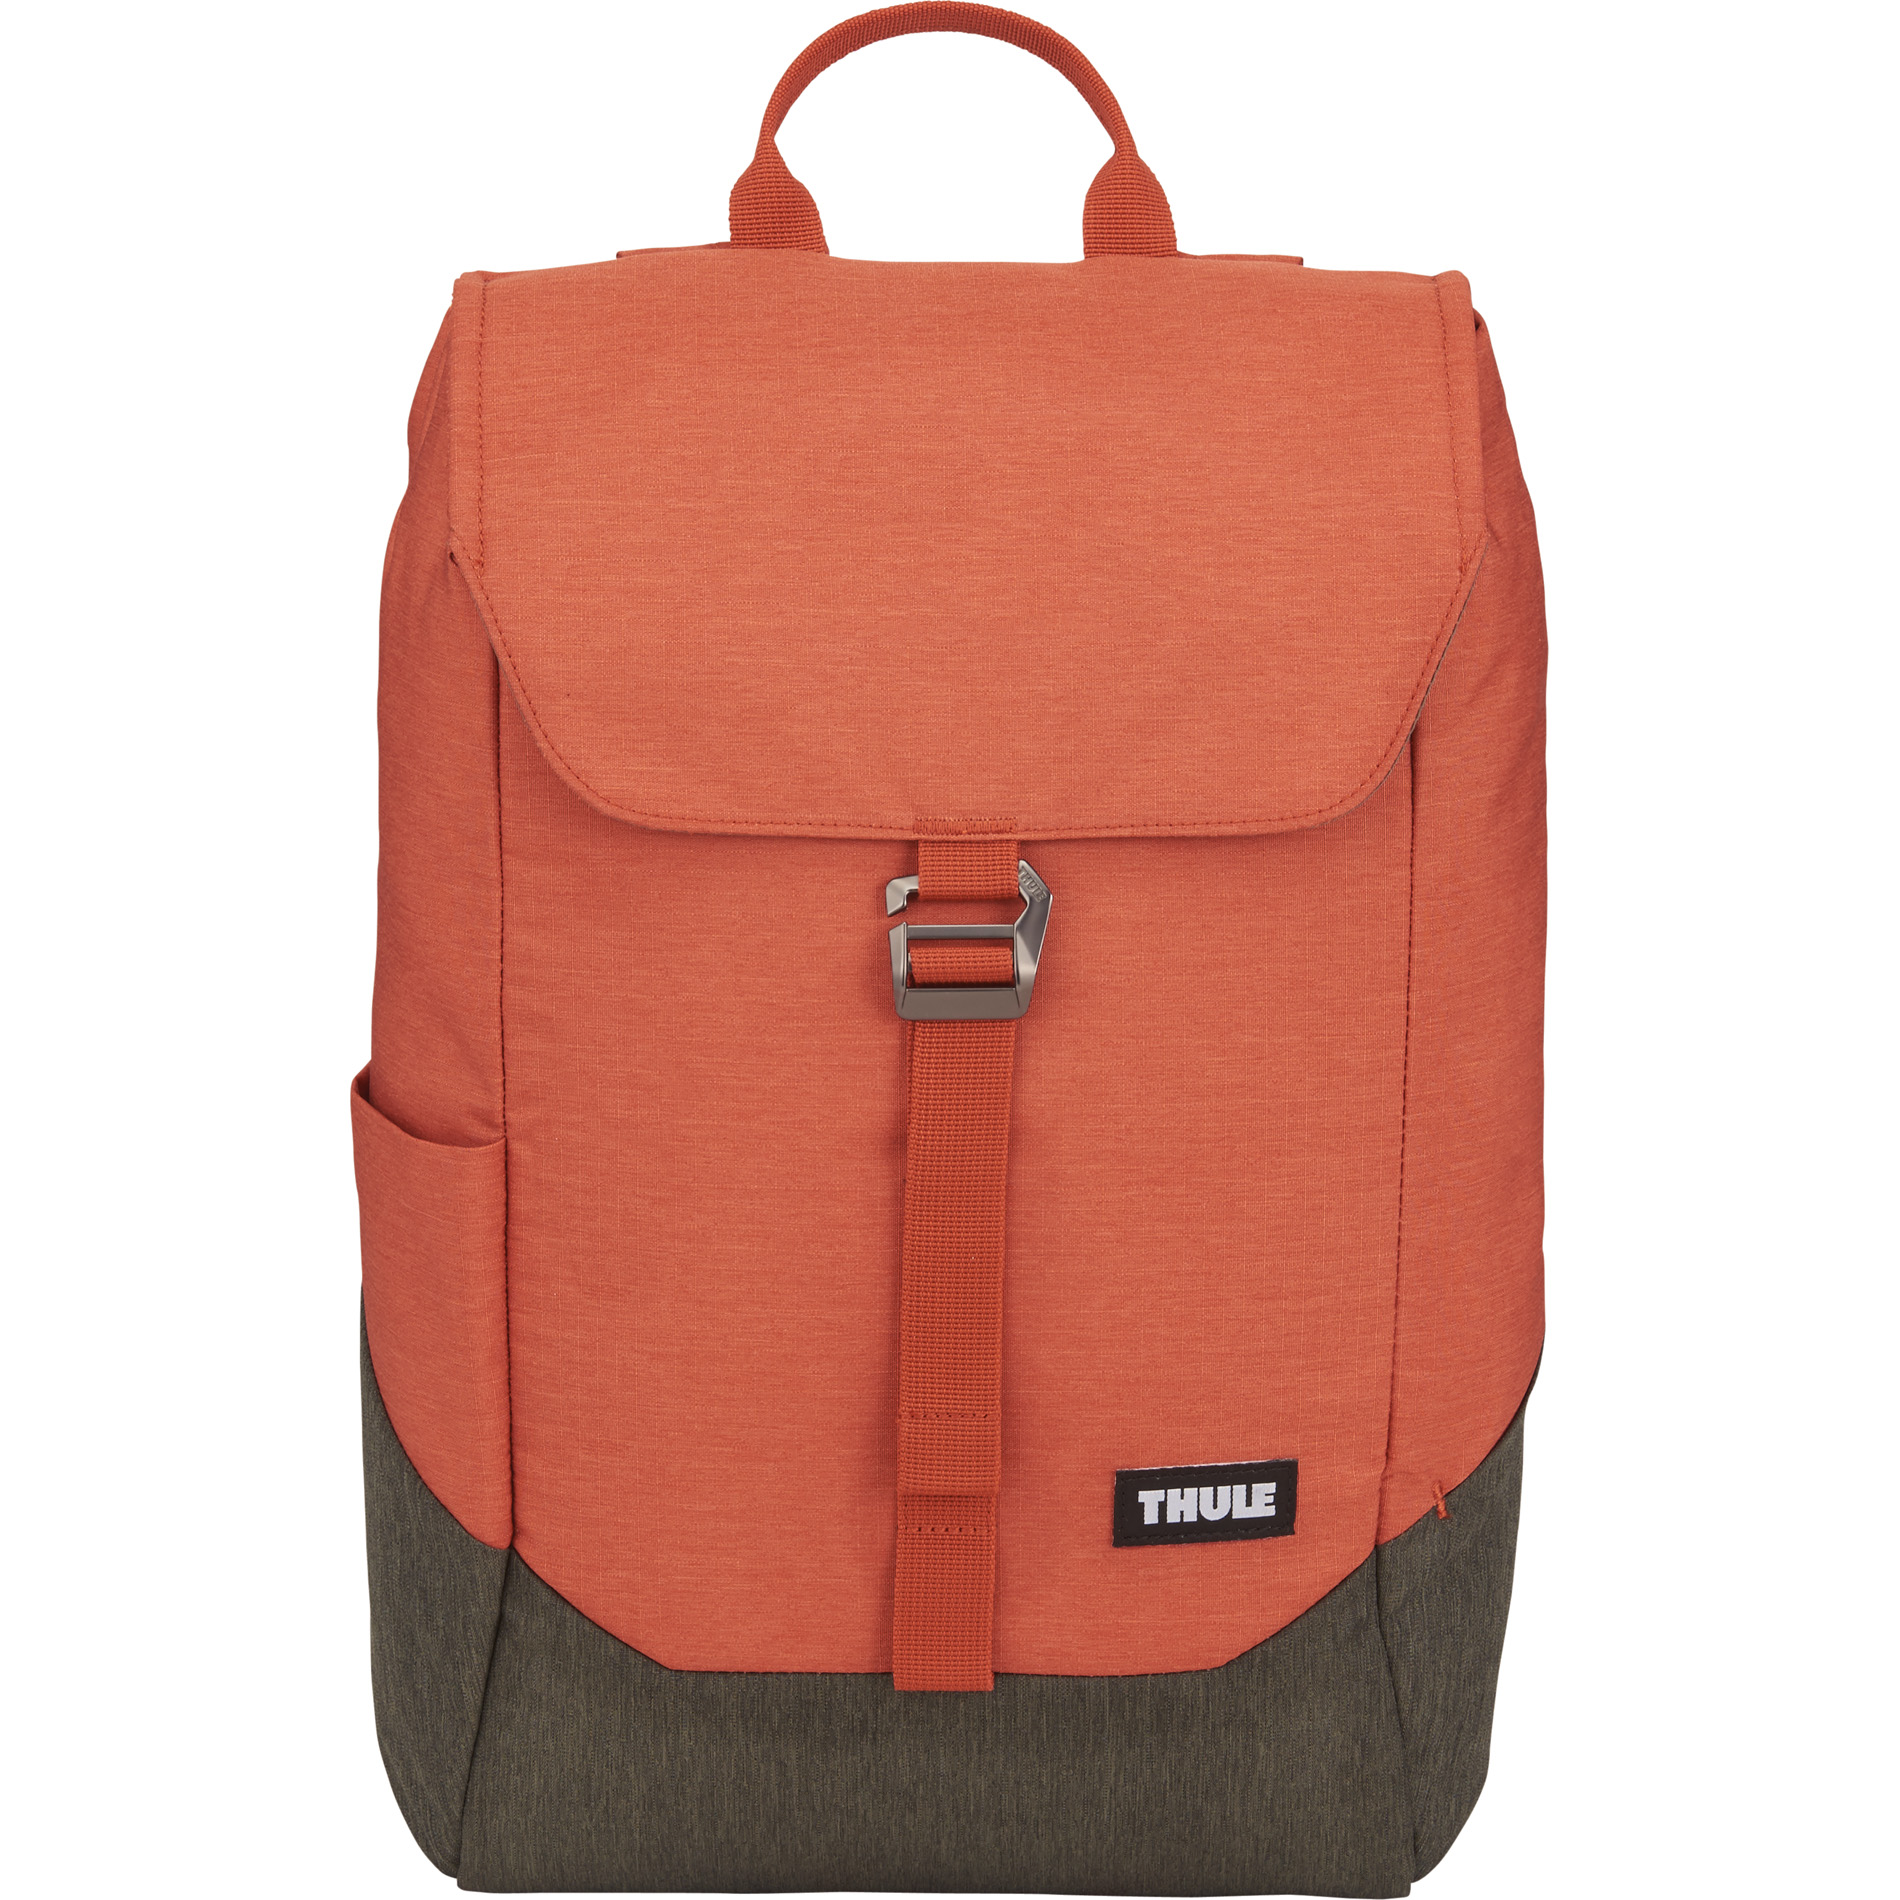 Thule 9020-34 - Lithos 15" Computer Backpack (16L)